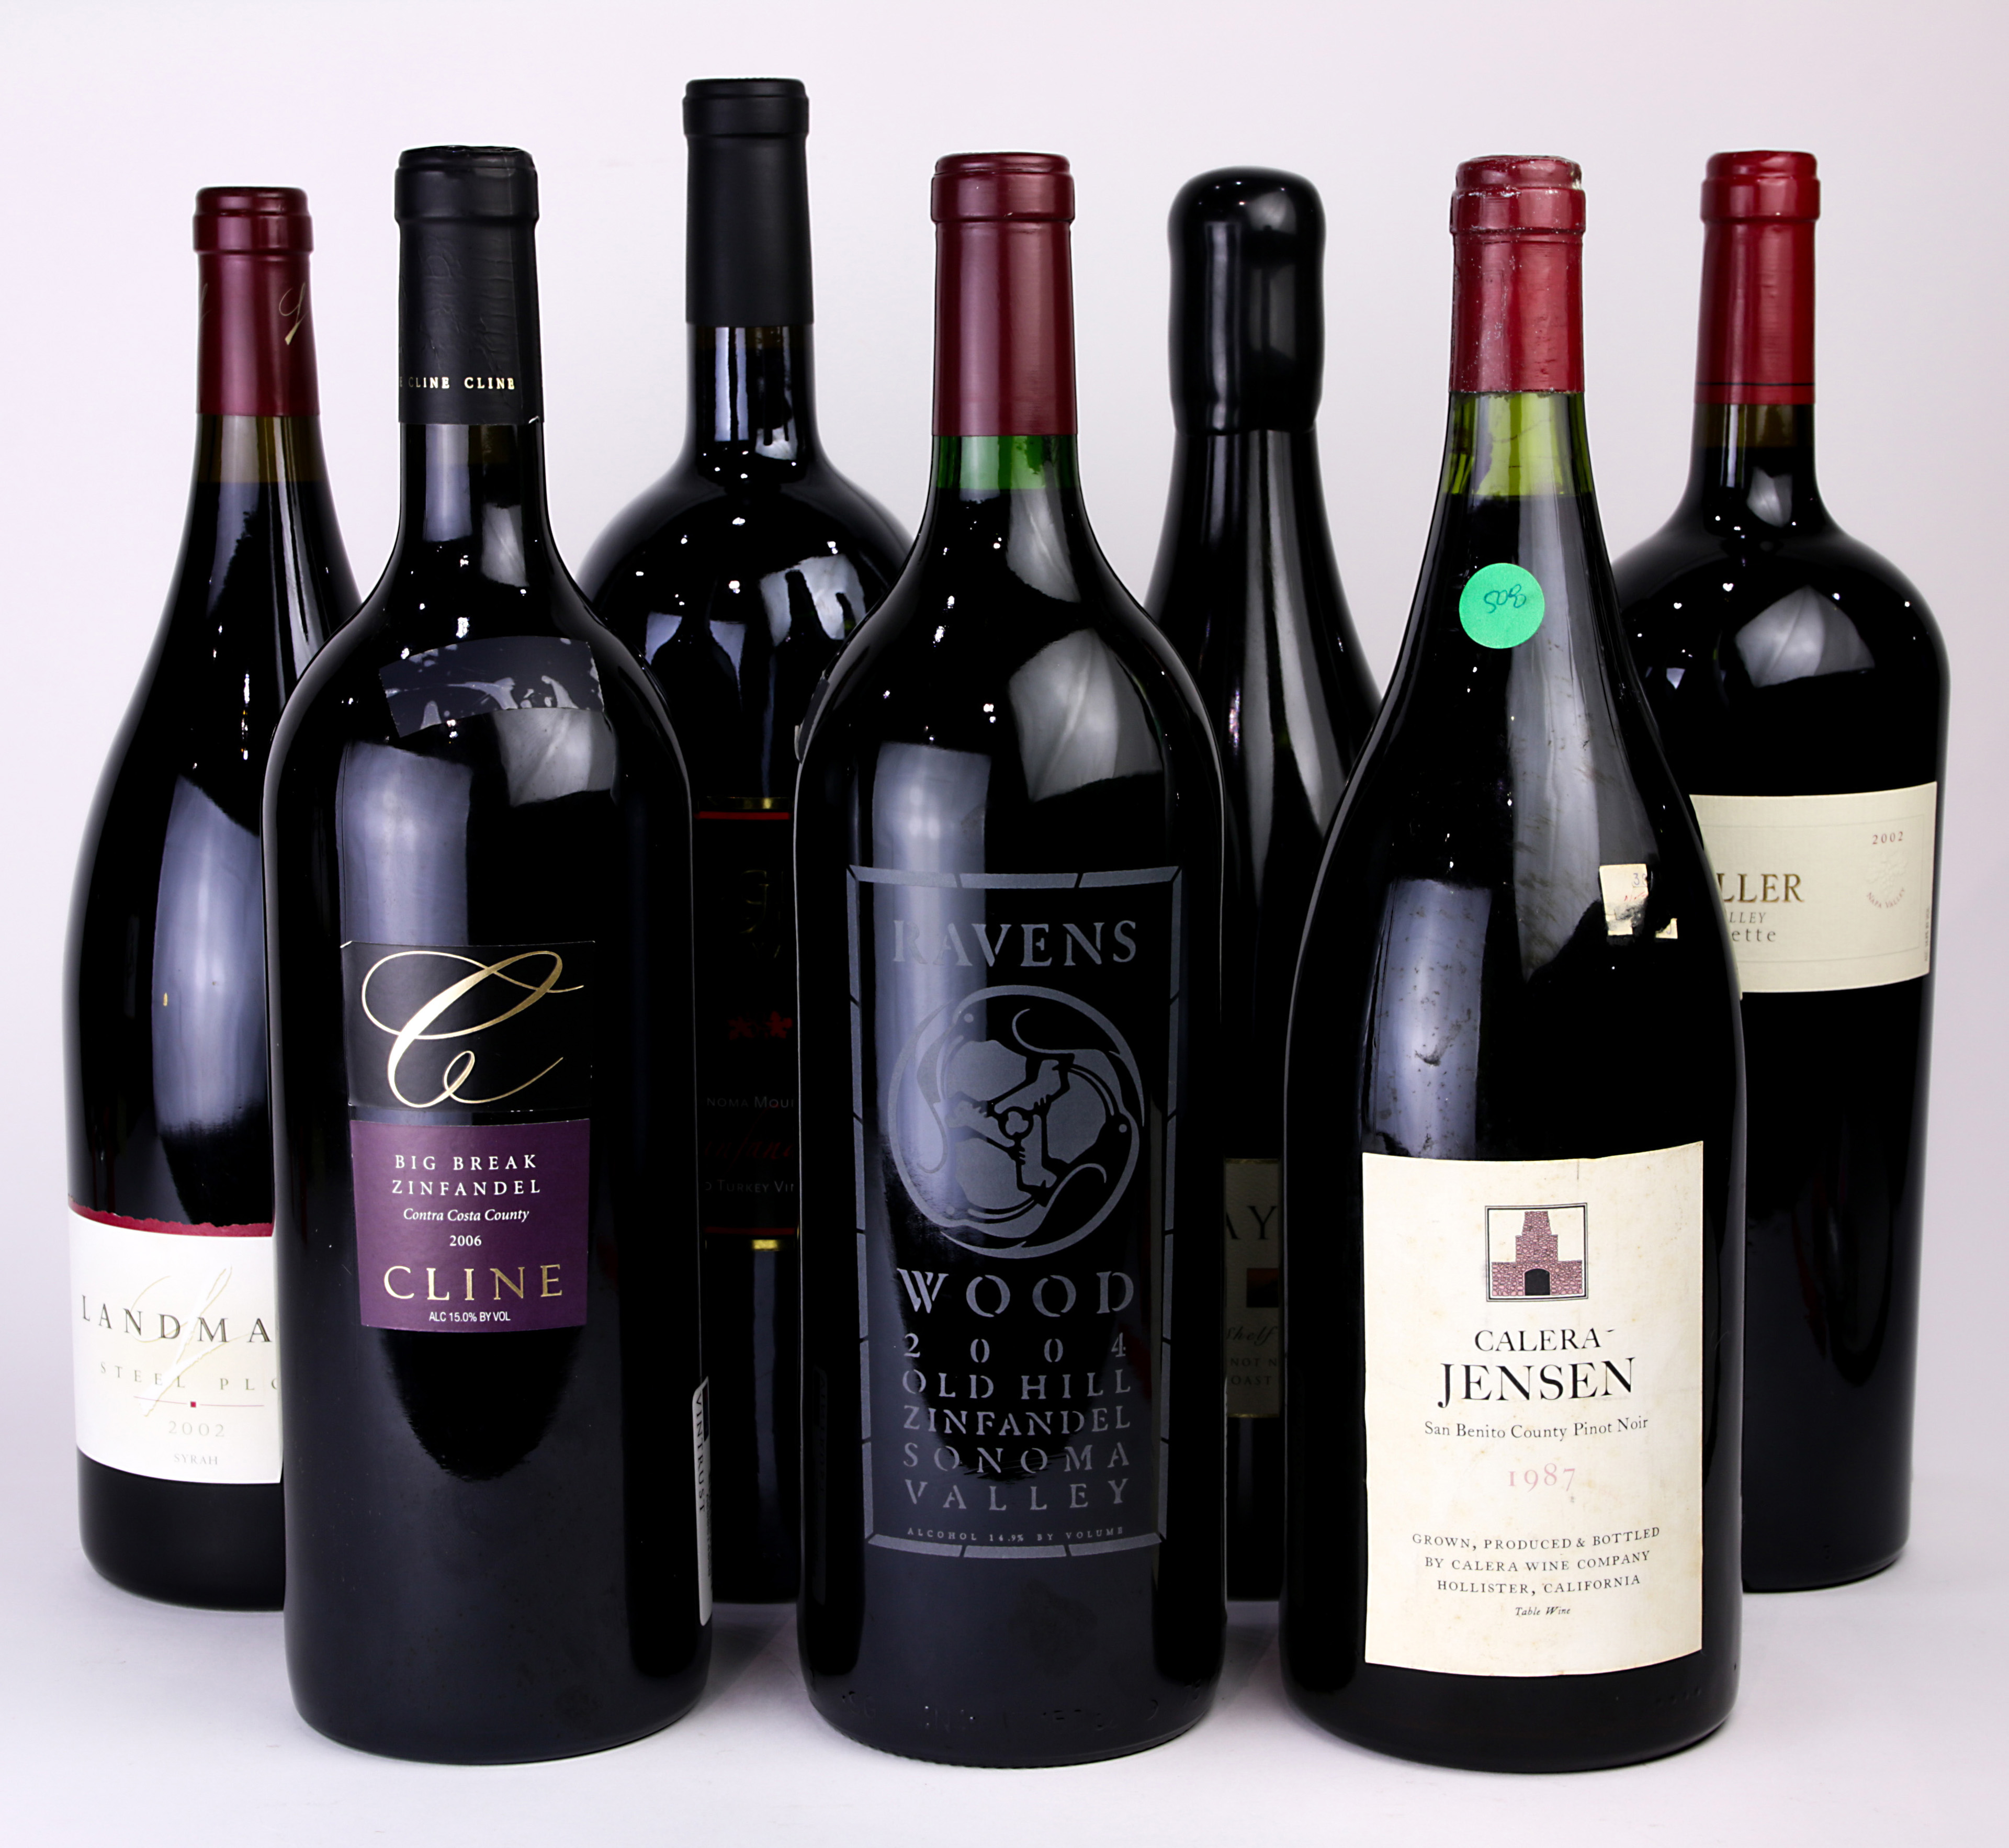 A large format California wine group